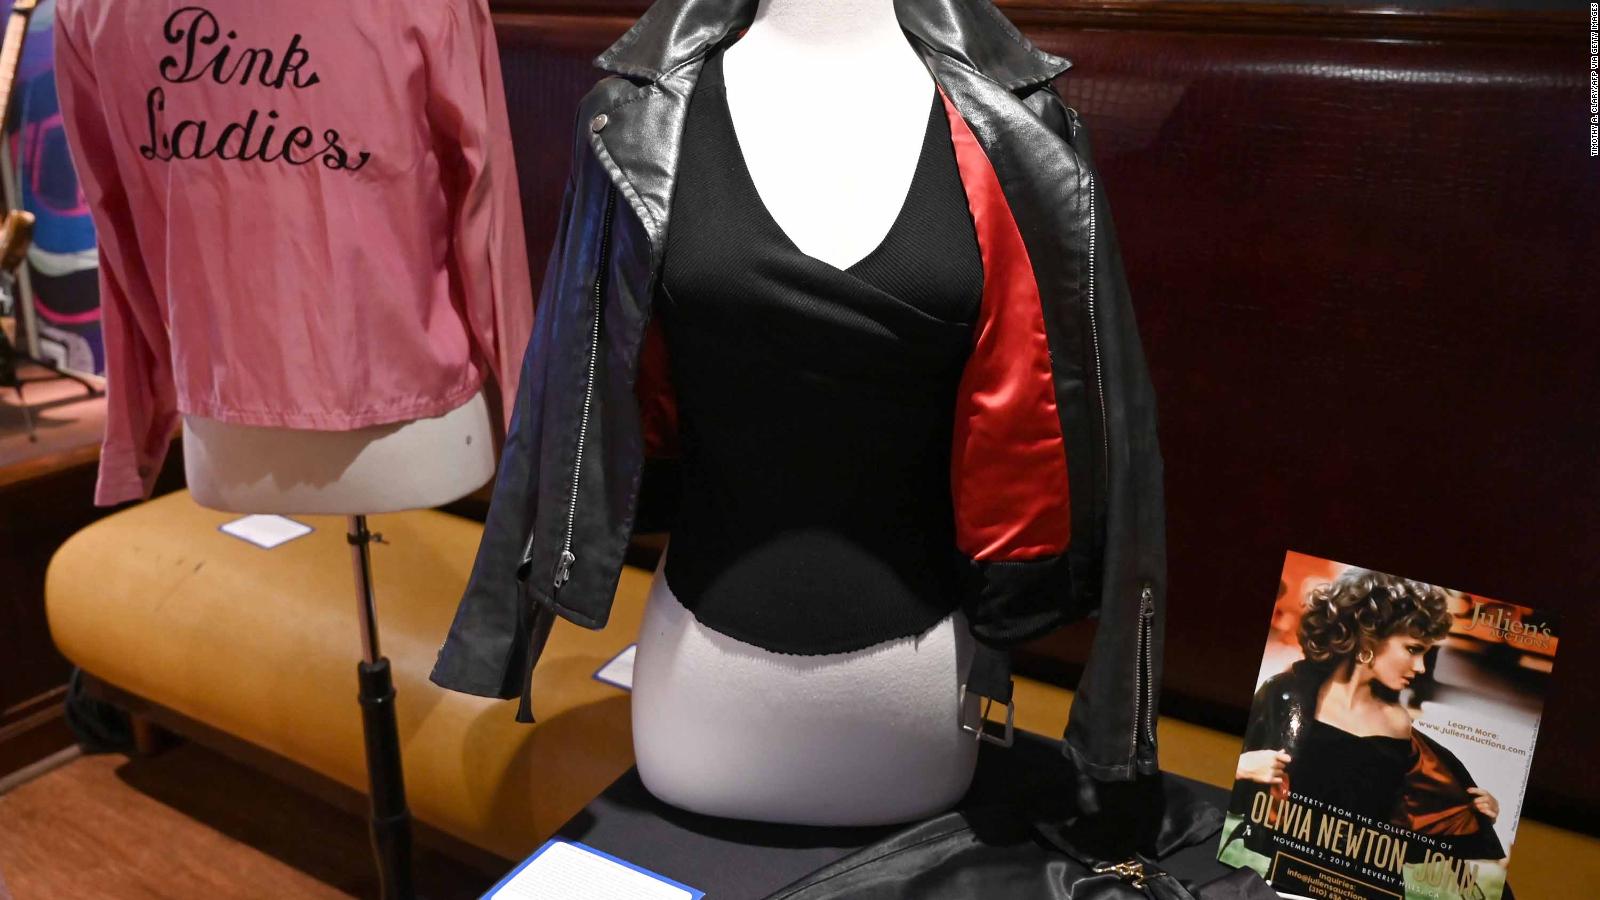 Olivia Newton-John's 'Grease' outfit could fetch up to $200,000 at auction  - CNN Style